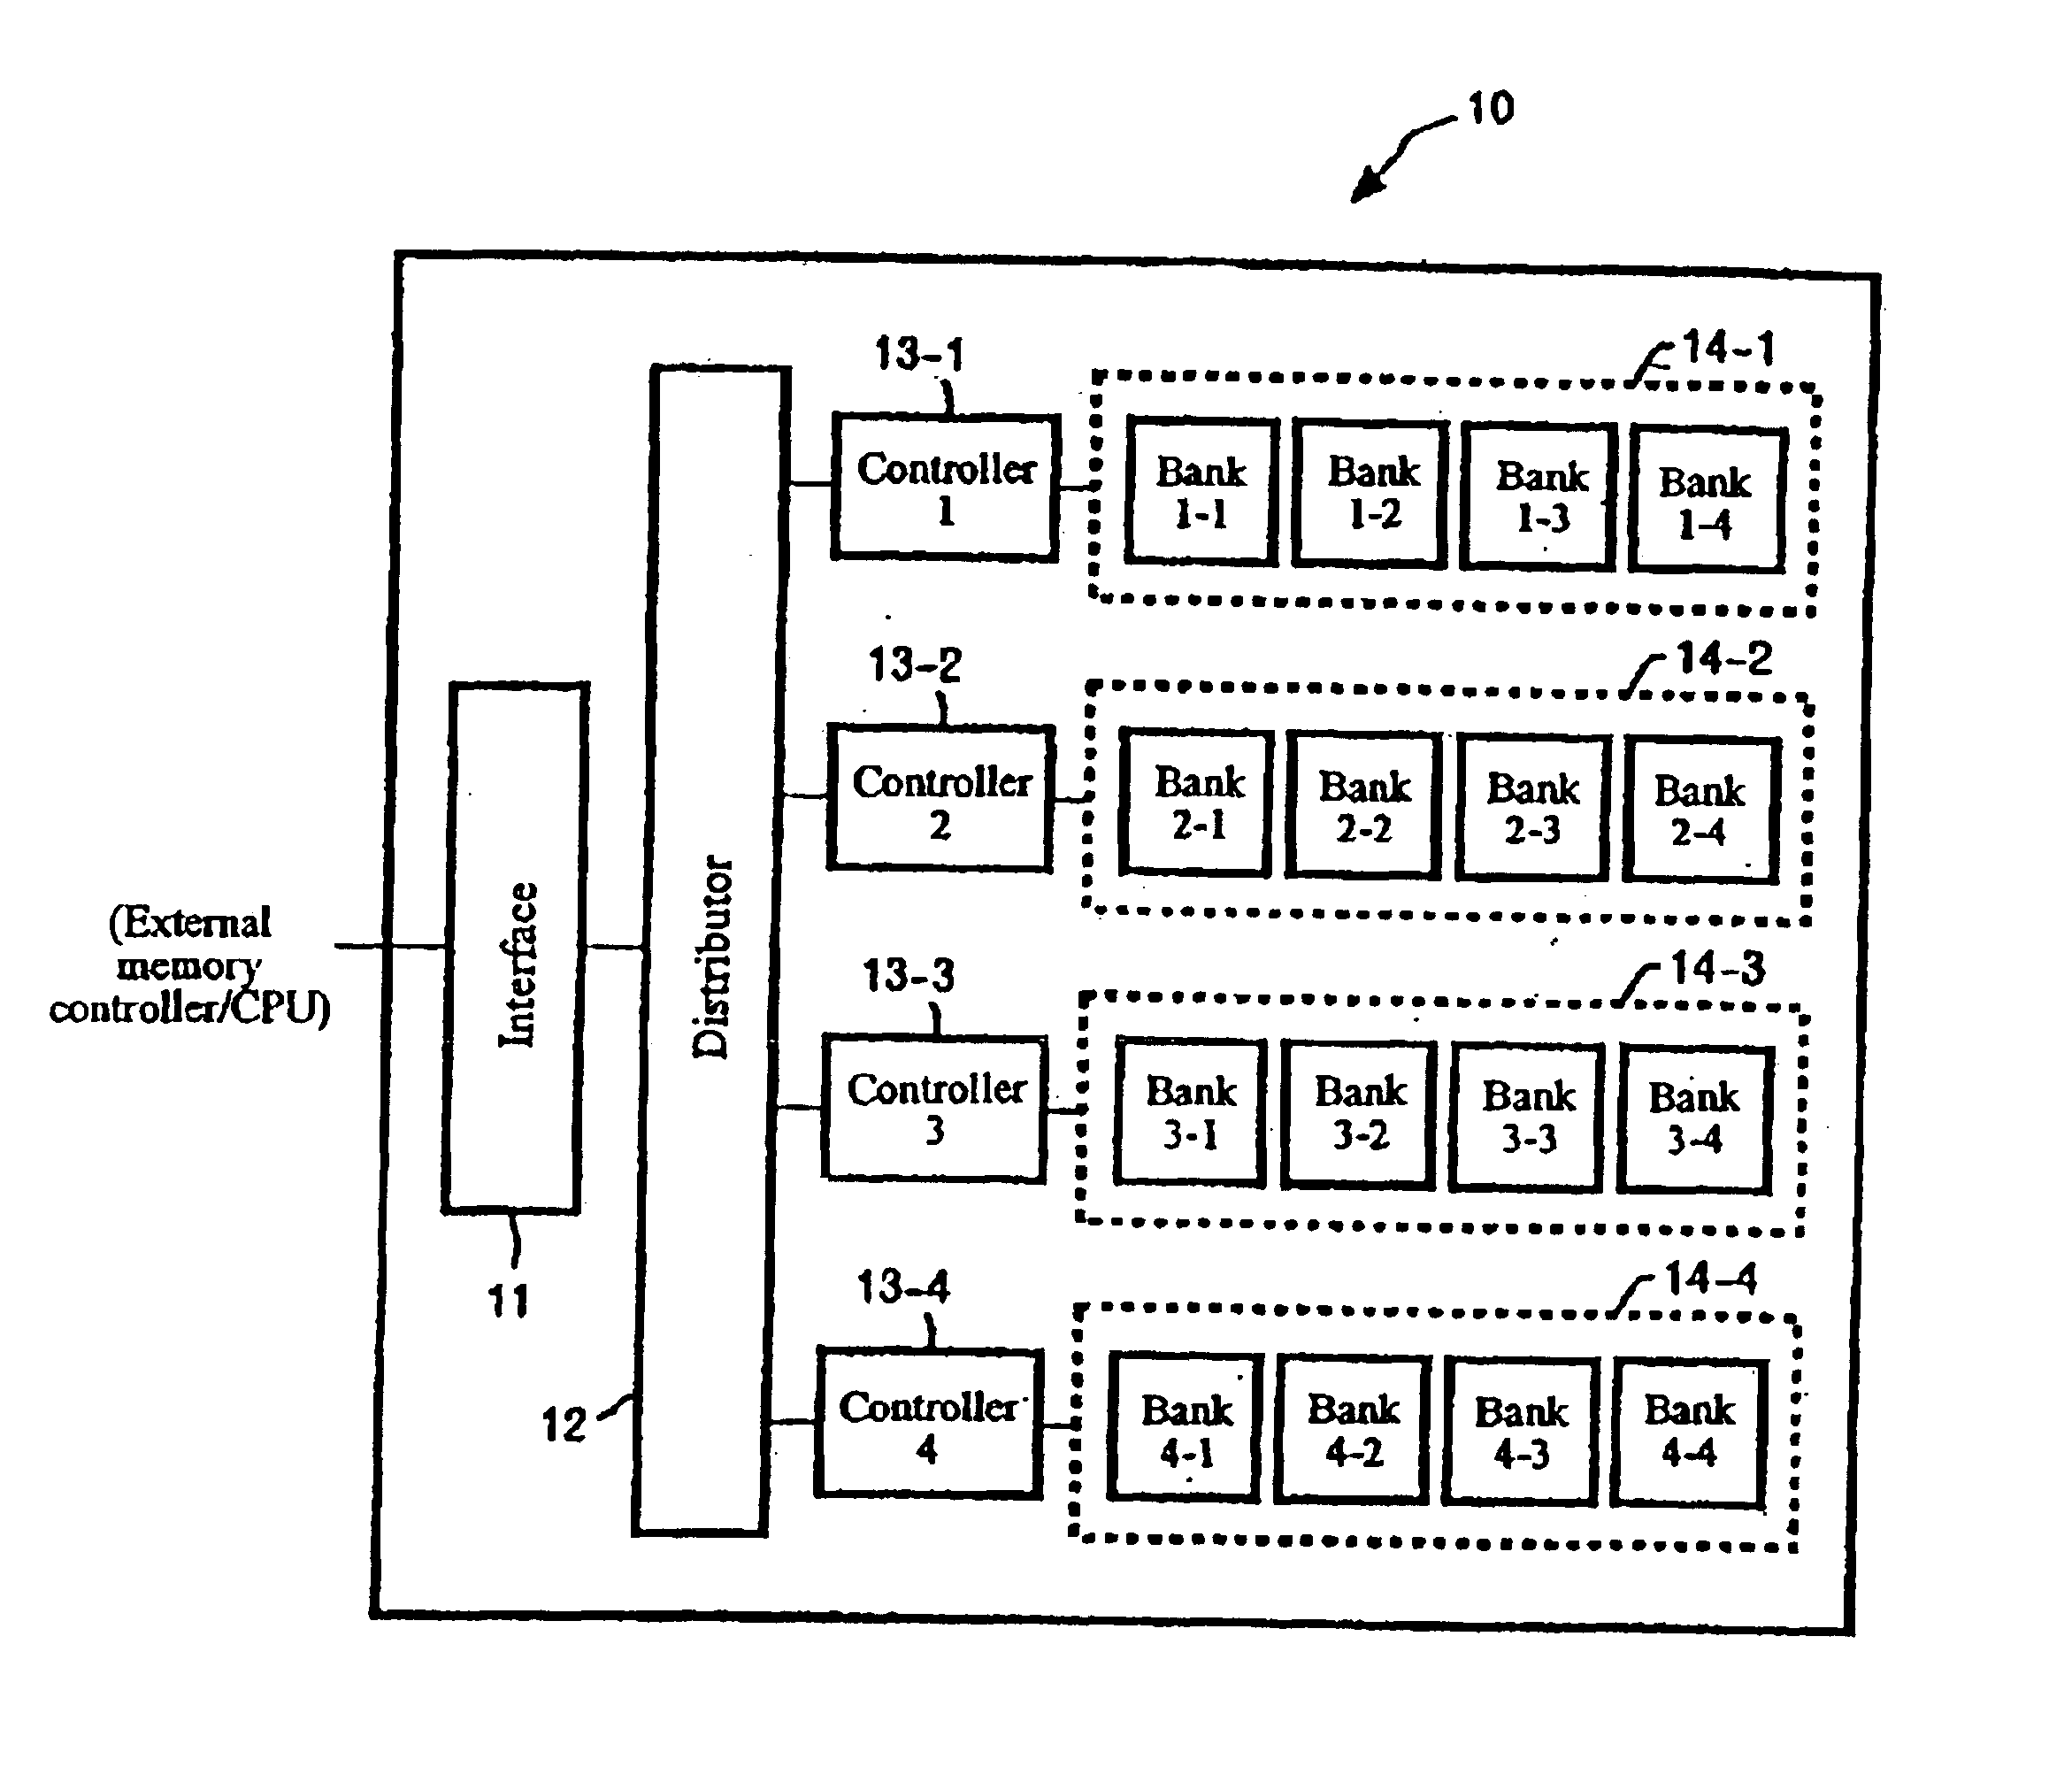 Search memory, memory search controller, and memory search method